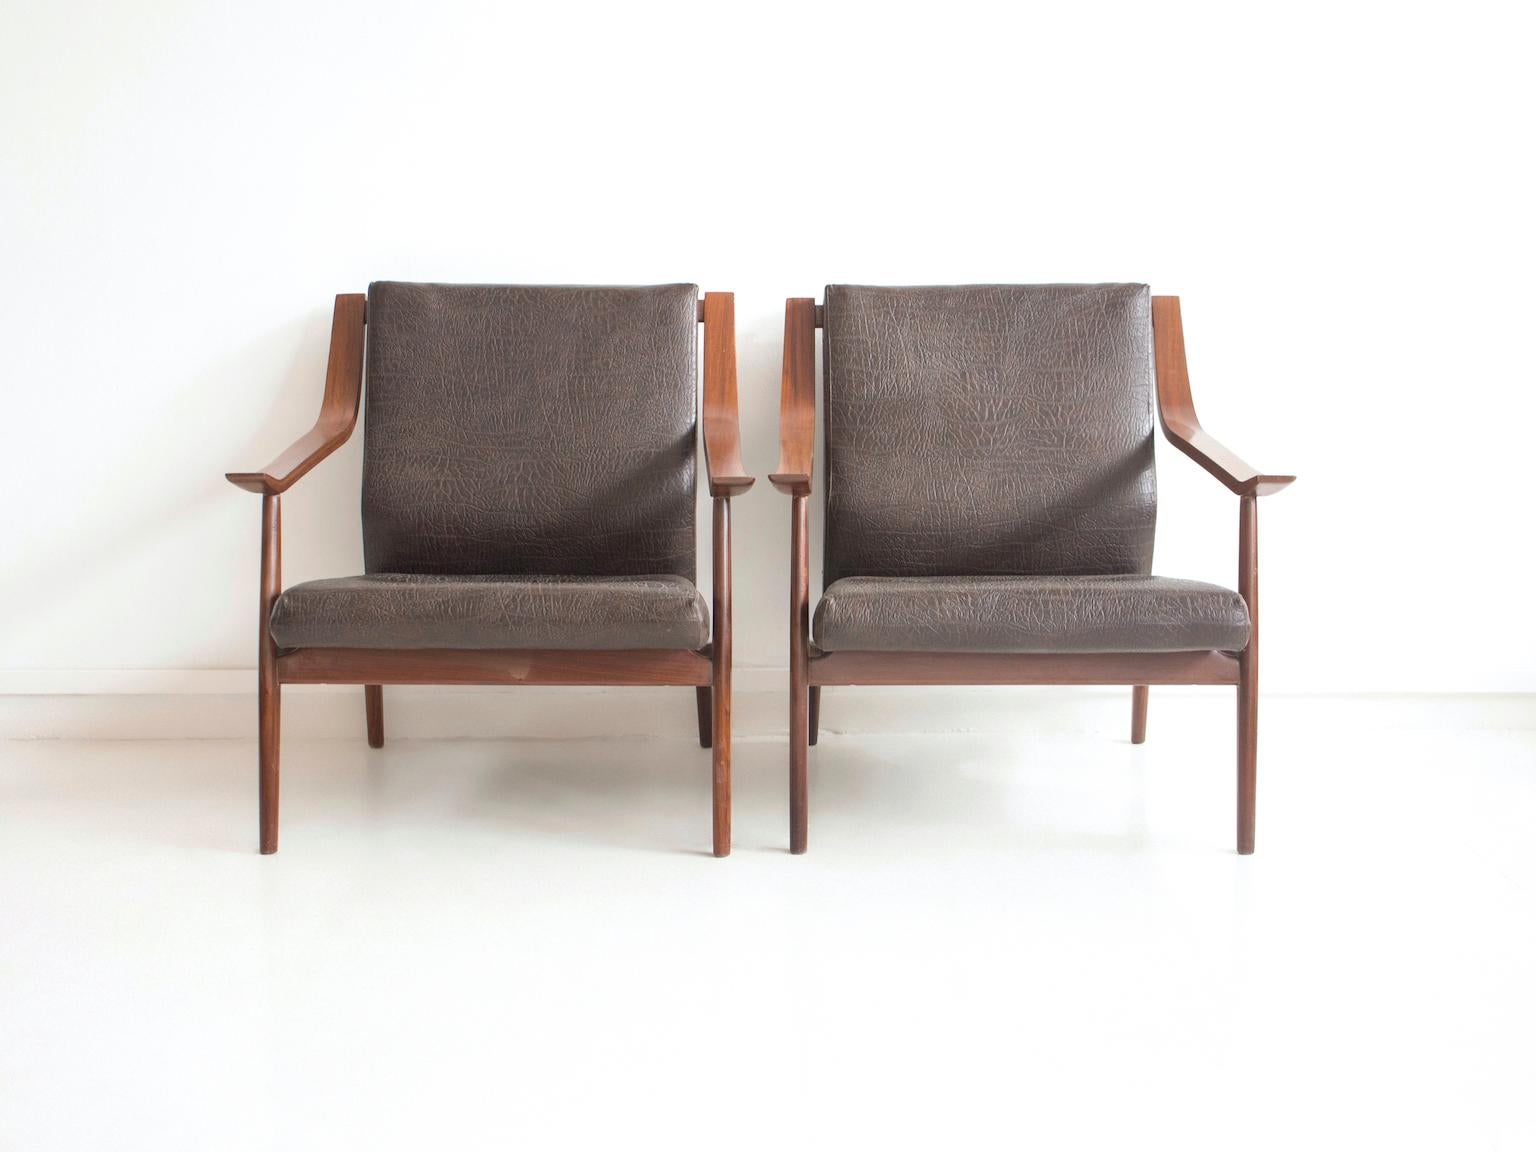 Pair of 1950s armchairs with wooden structure. Seat and back cushions covered in dark brown embossed imitation leather. Manufactured in Italy.